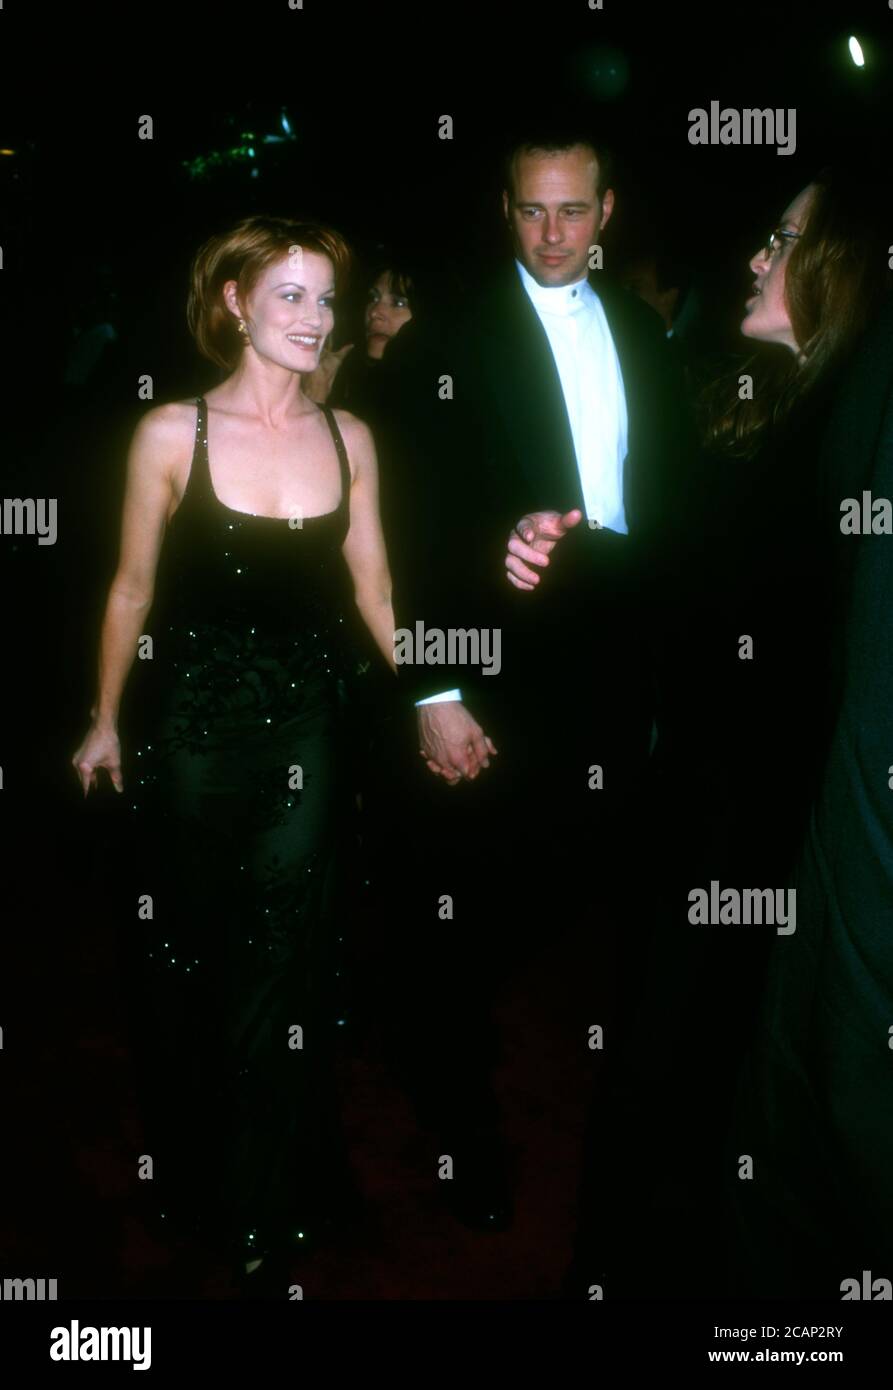 Universal City, California, USA 10th March 1996 Actress Laura Leighton attends the 22nd Annual People's Choice Awards on March 10, 1996 at Universal Studios in Universal City, California, USA. Photo by Barry King/Alamy Stock Photo Stock Photo